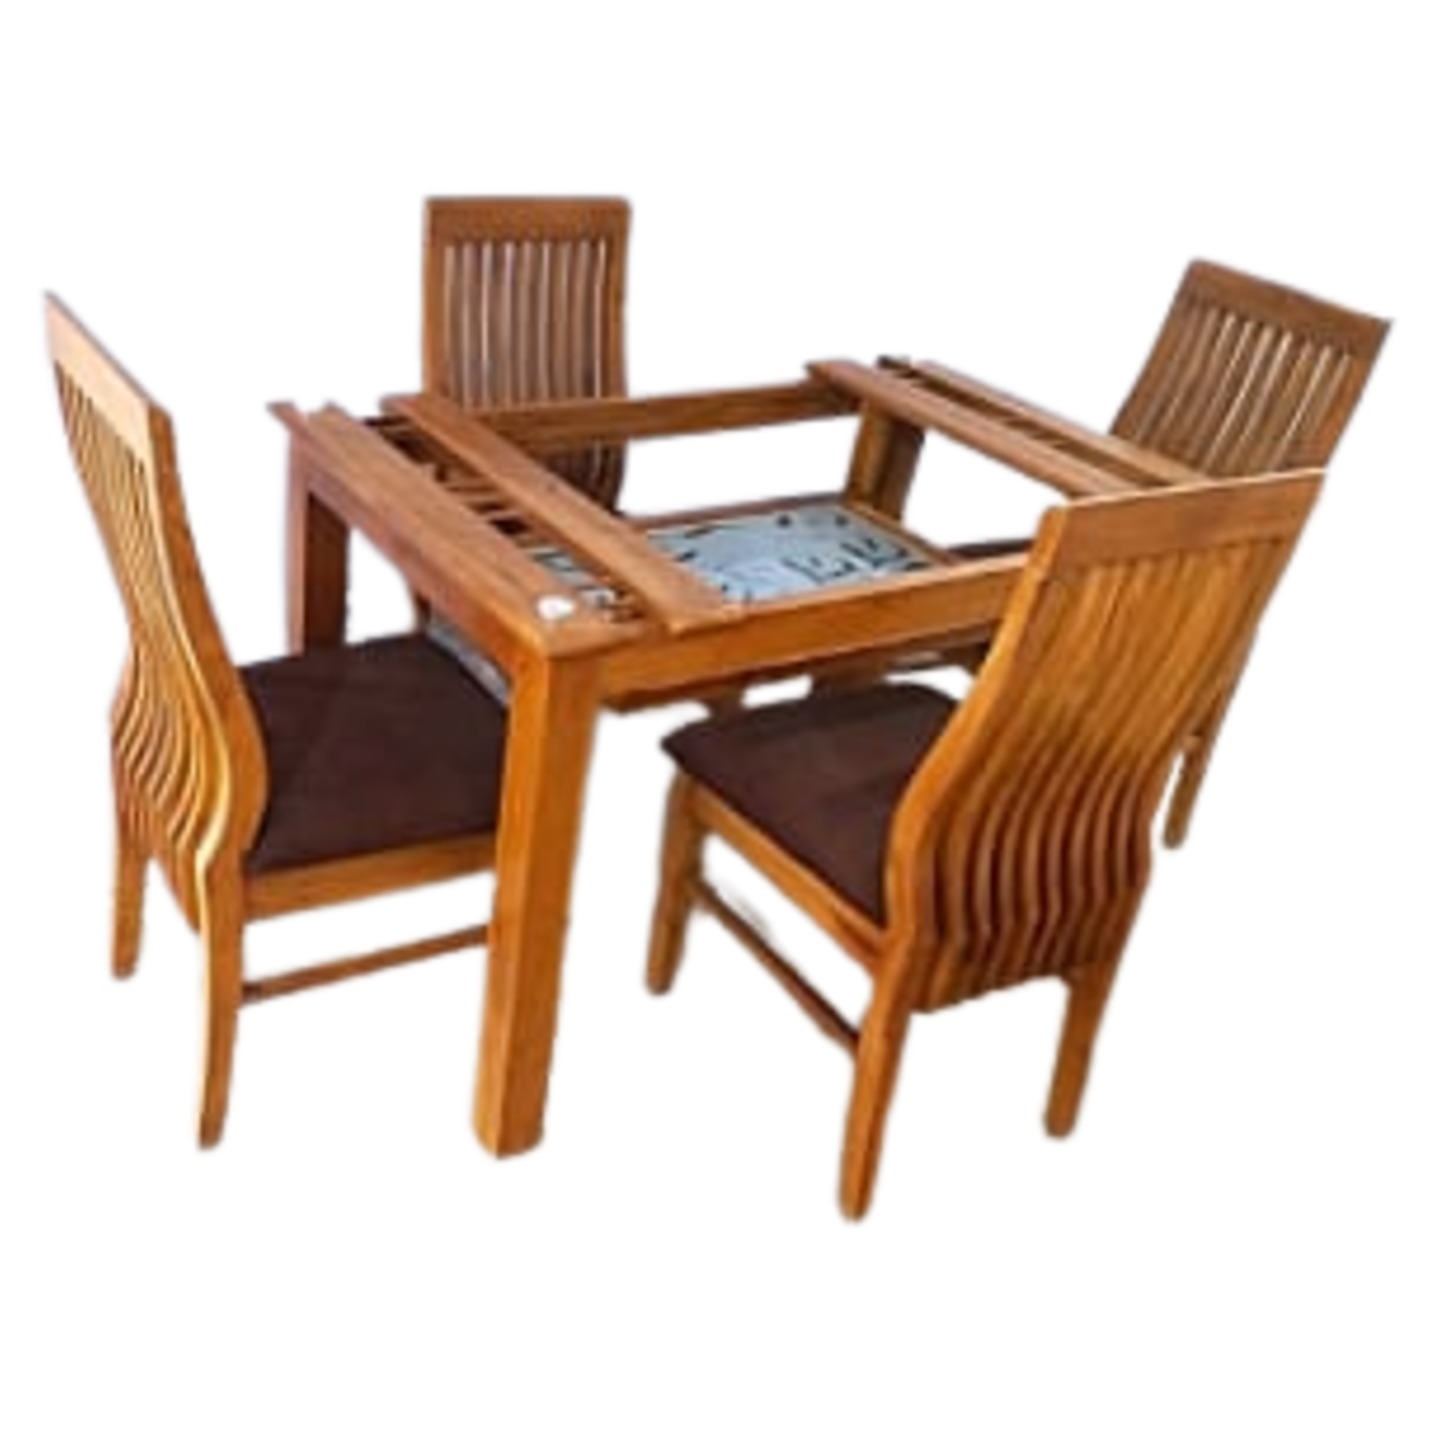 DW Glass Top L-012 Sahil Self Six Seater Dining Table Set in Brown Colour